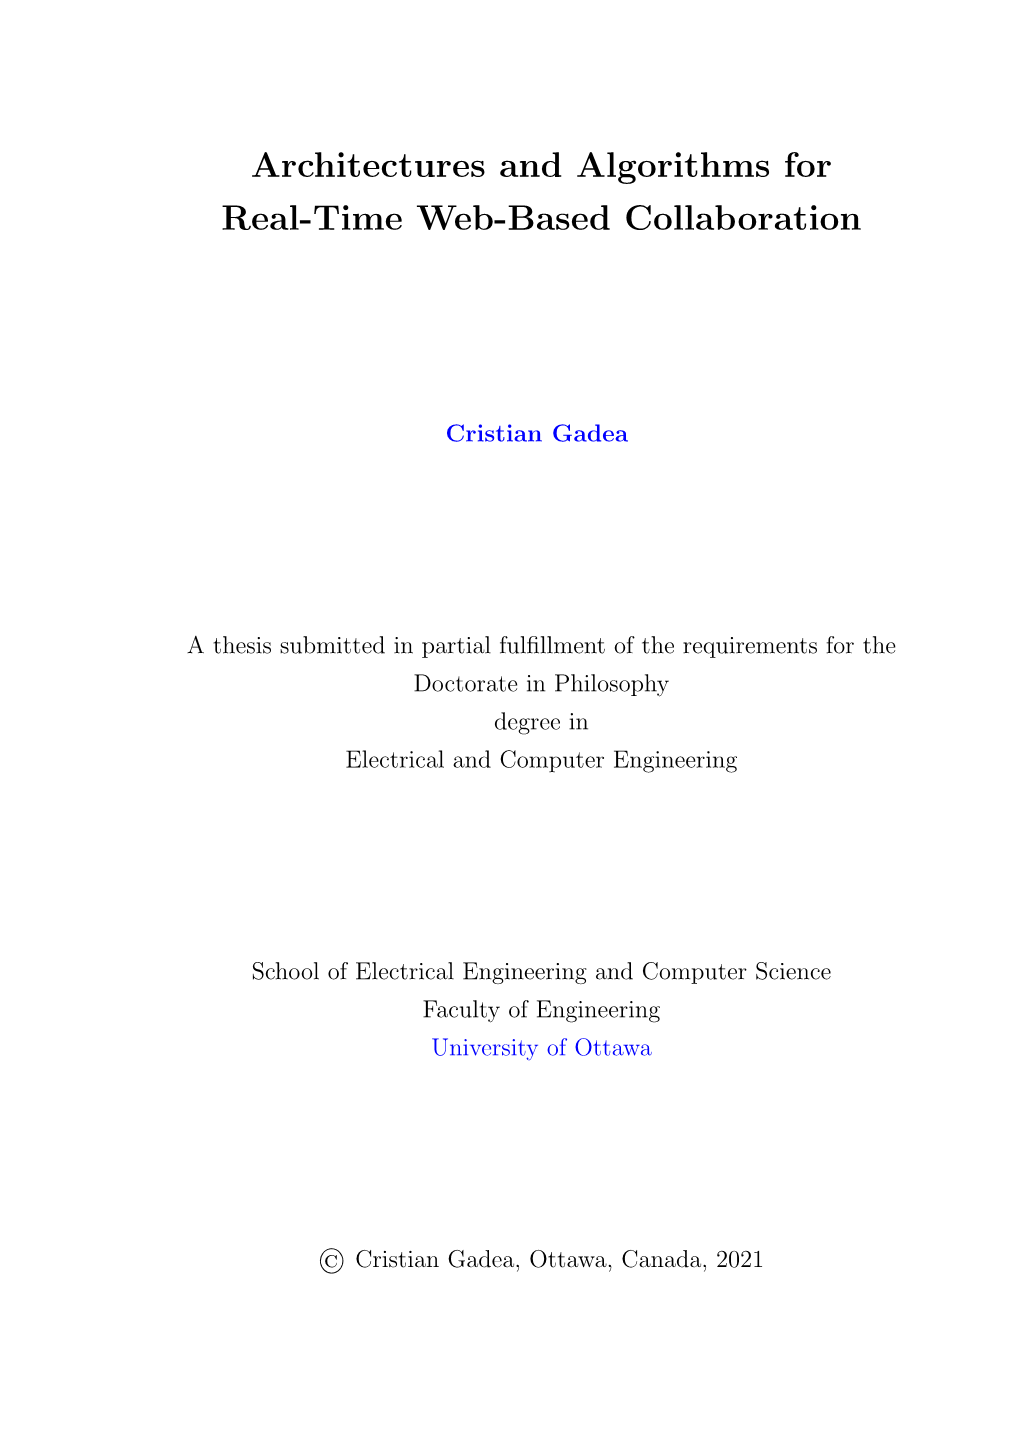 Architectures and Algorithms for Real-Time Web-Based Collaboration